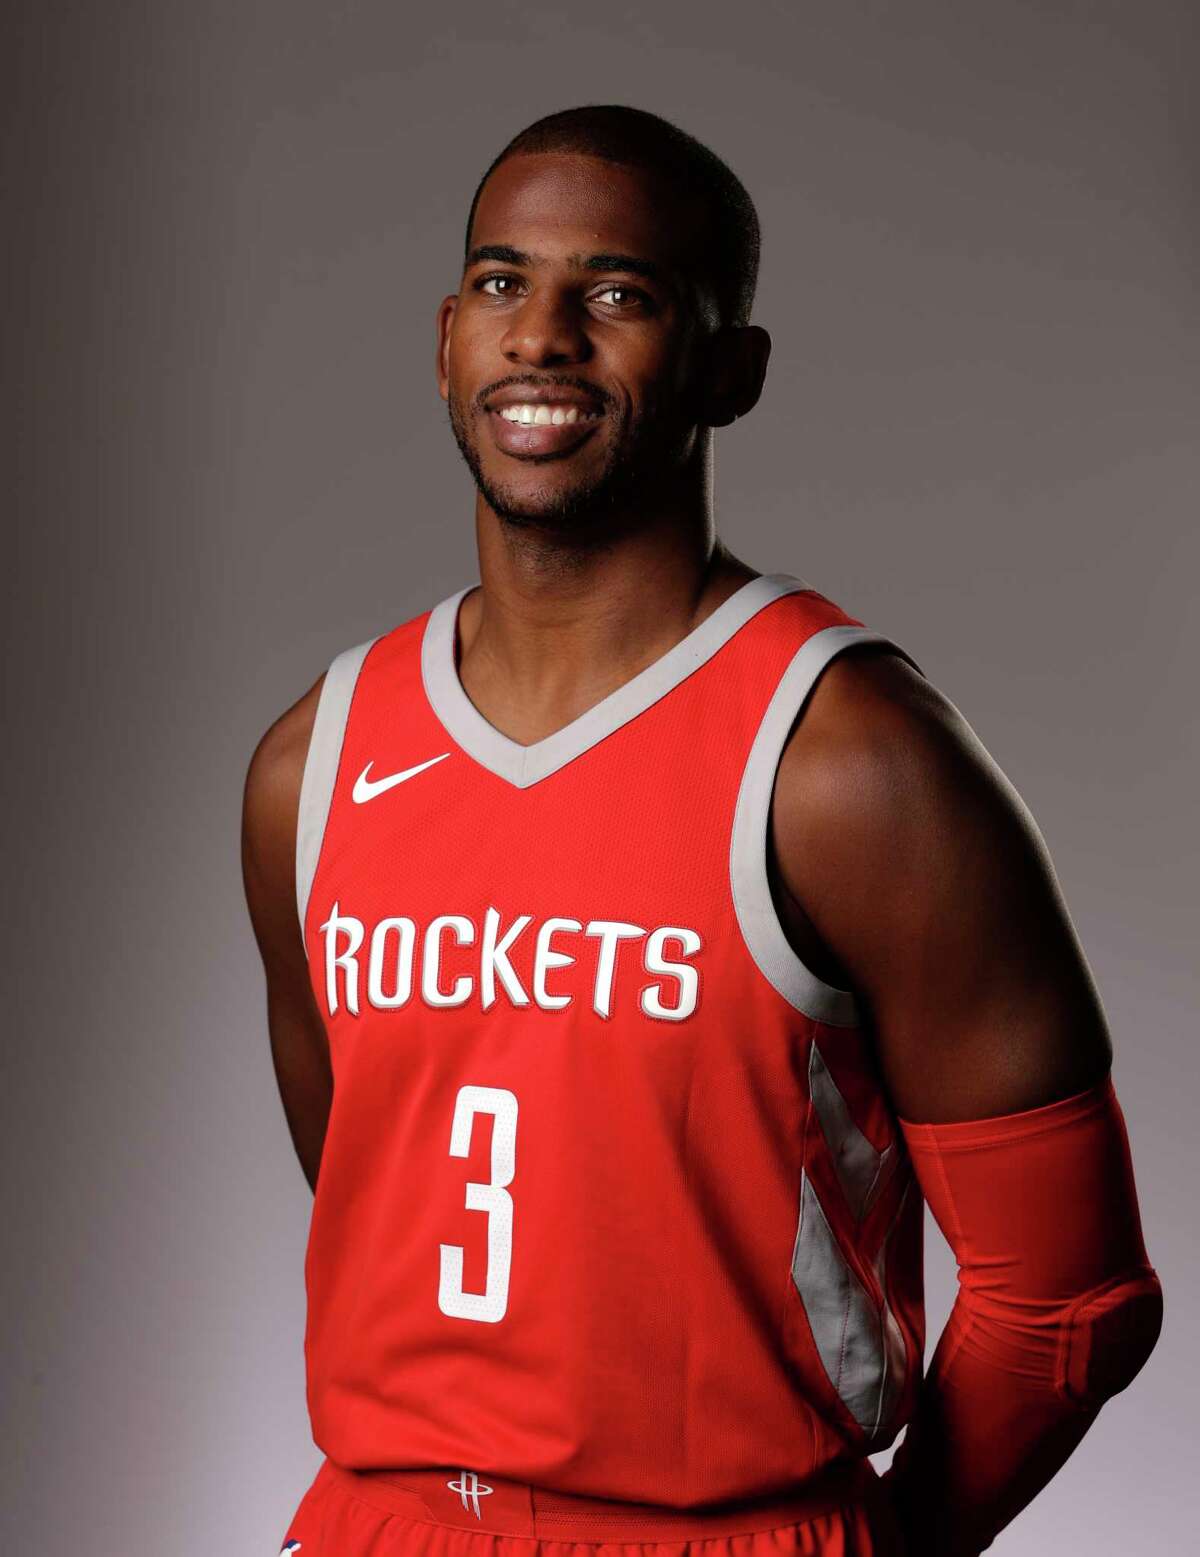 Chris Paul's future after Rockets is murky - The Dream Shake